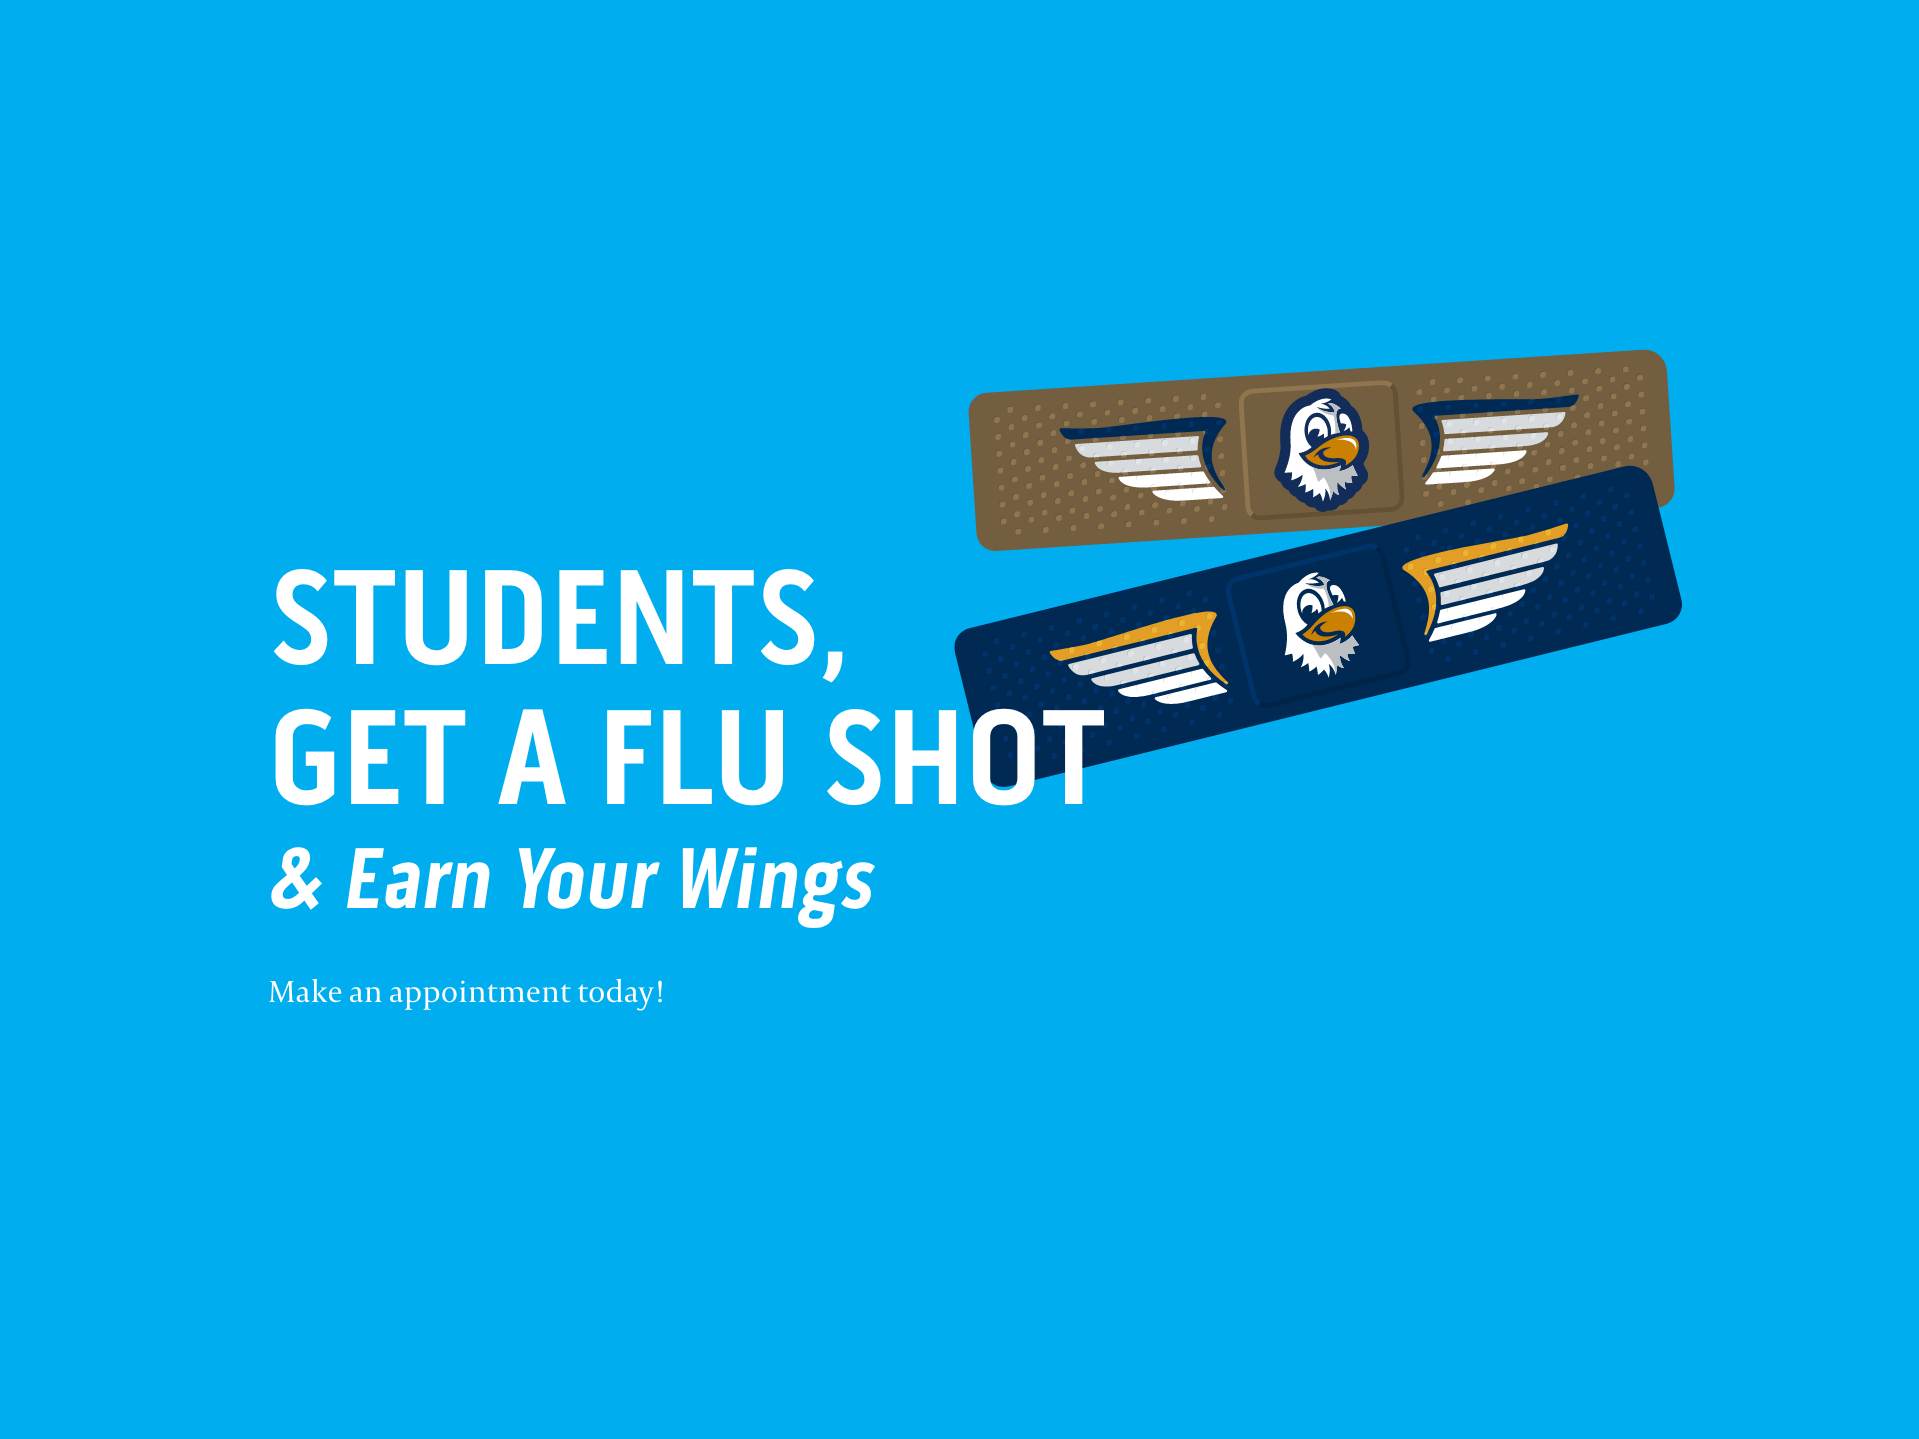 Get your flu shot at Student Health